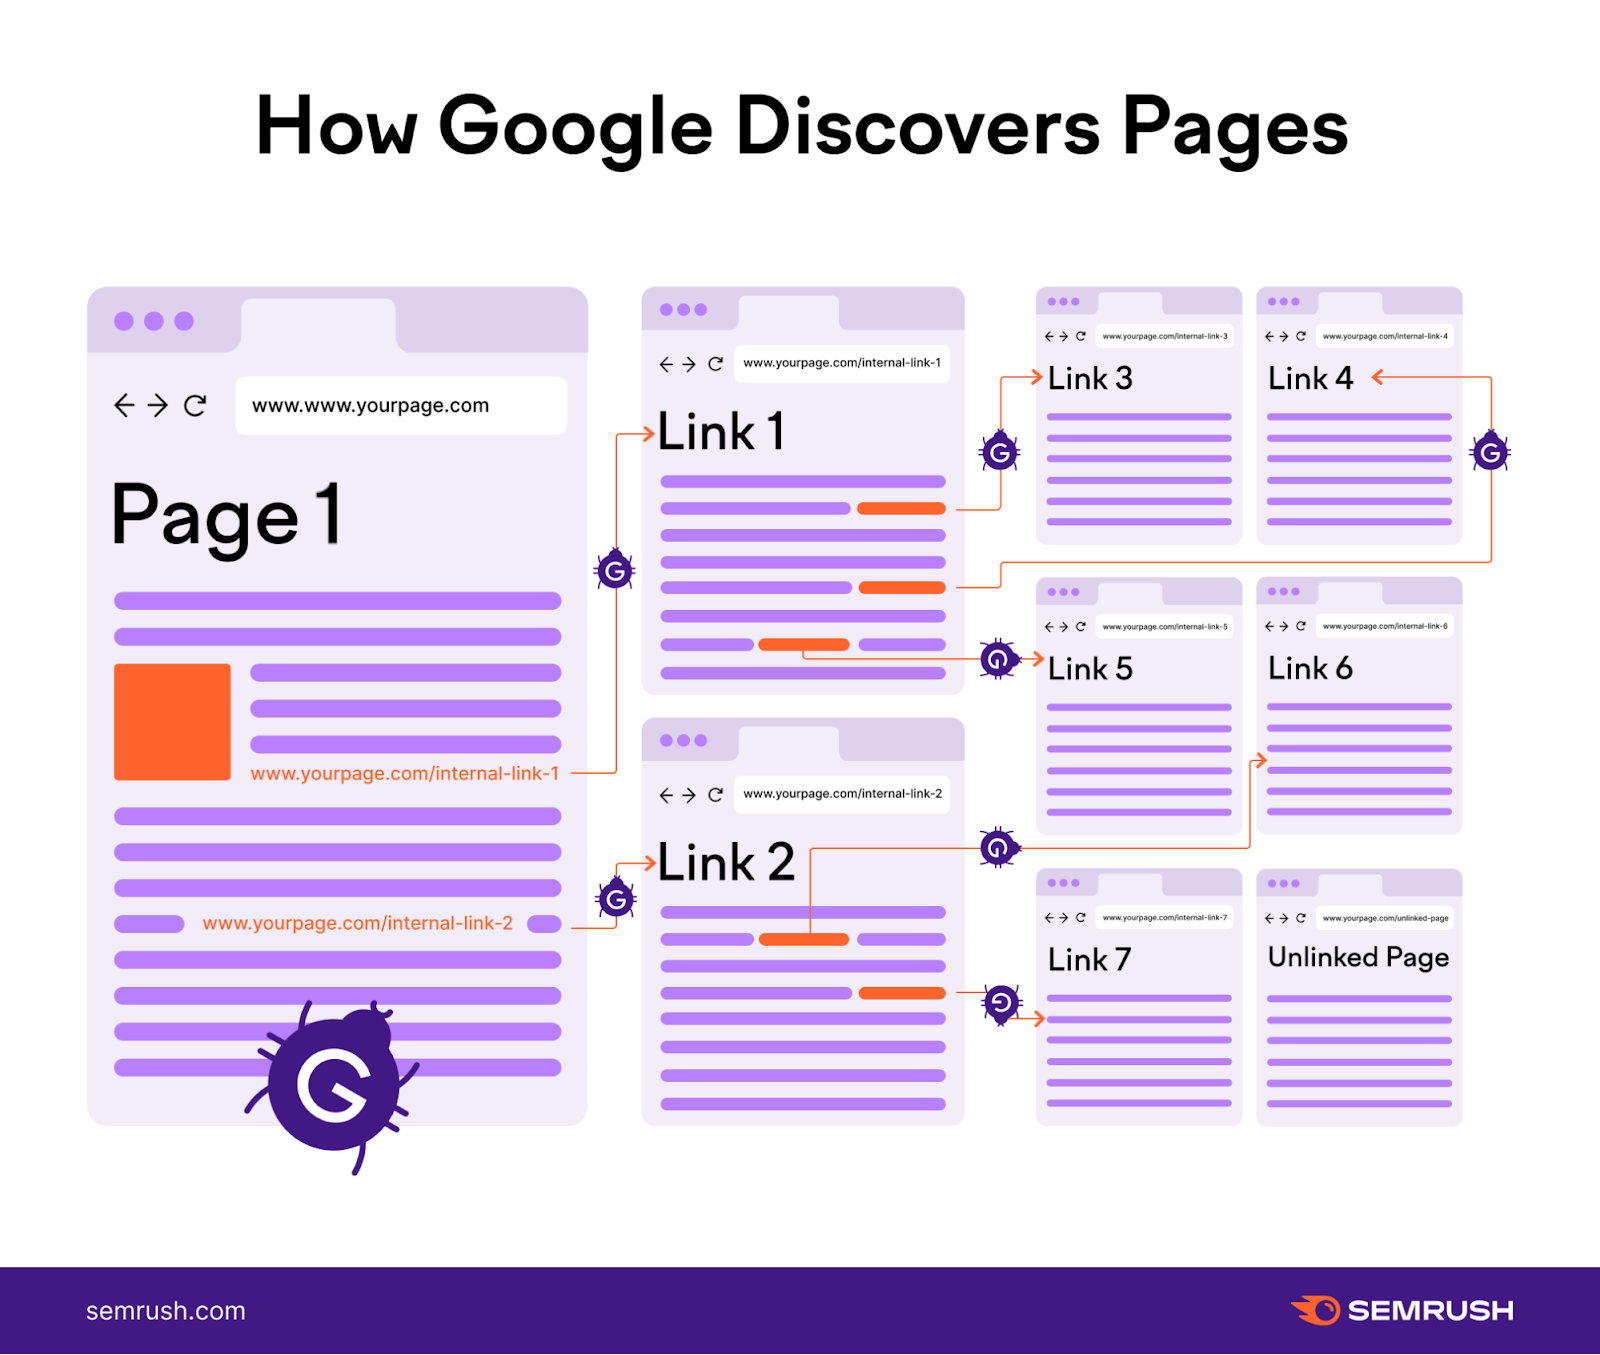 An ingofraphic by Semrush showing how Google discovers pages